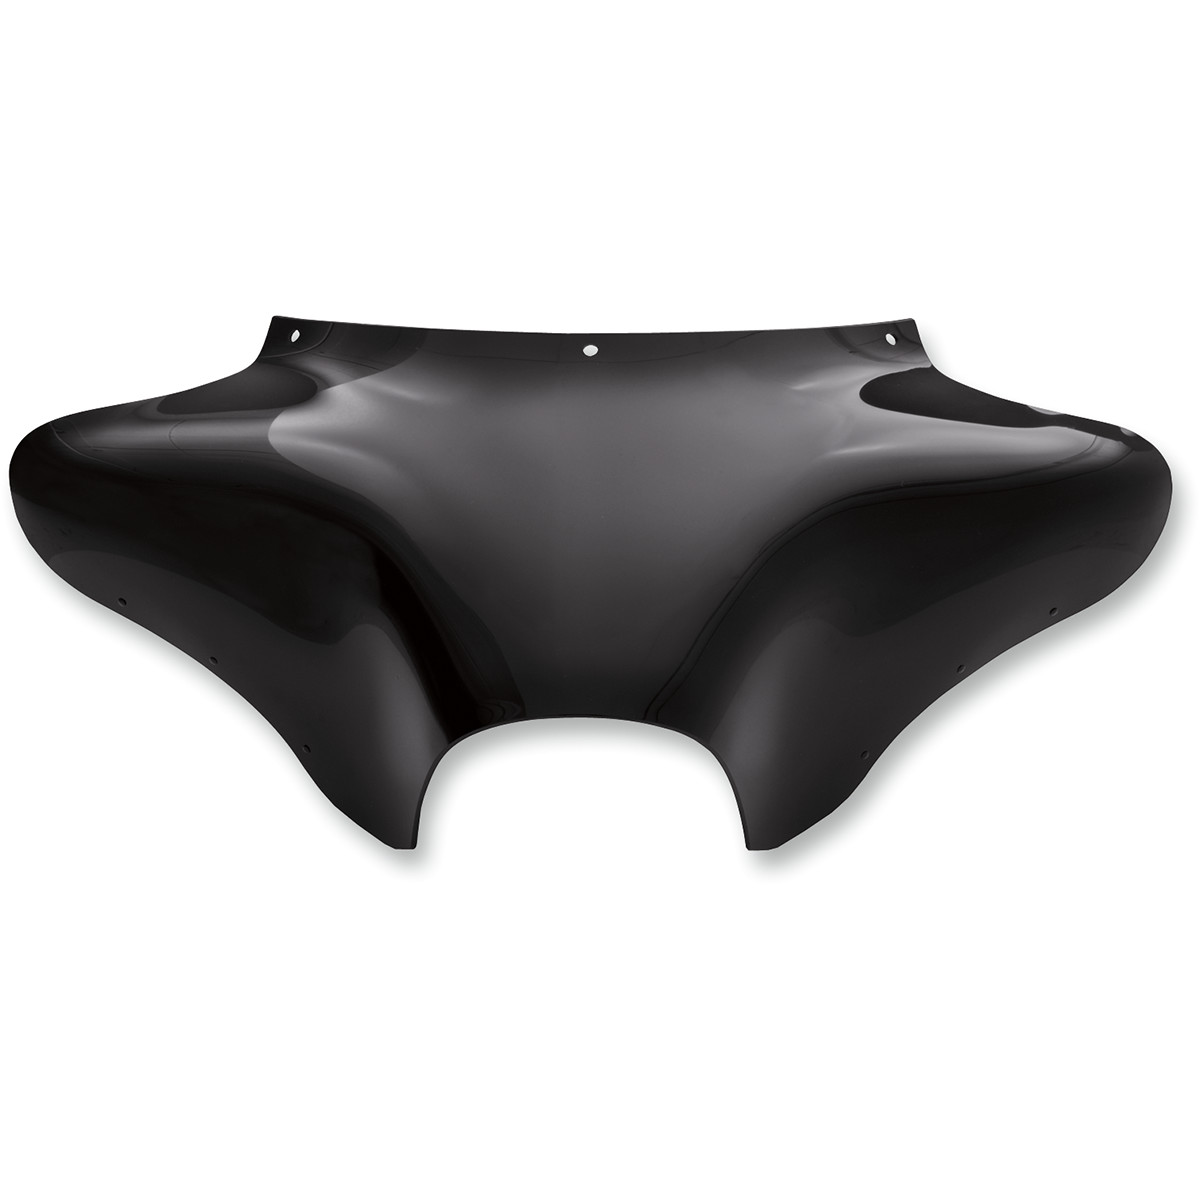 Batwing Fairing for Road King 4x5.25 EMPTY 